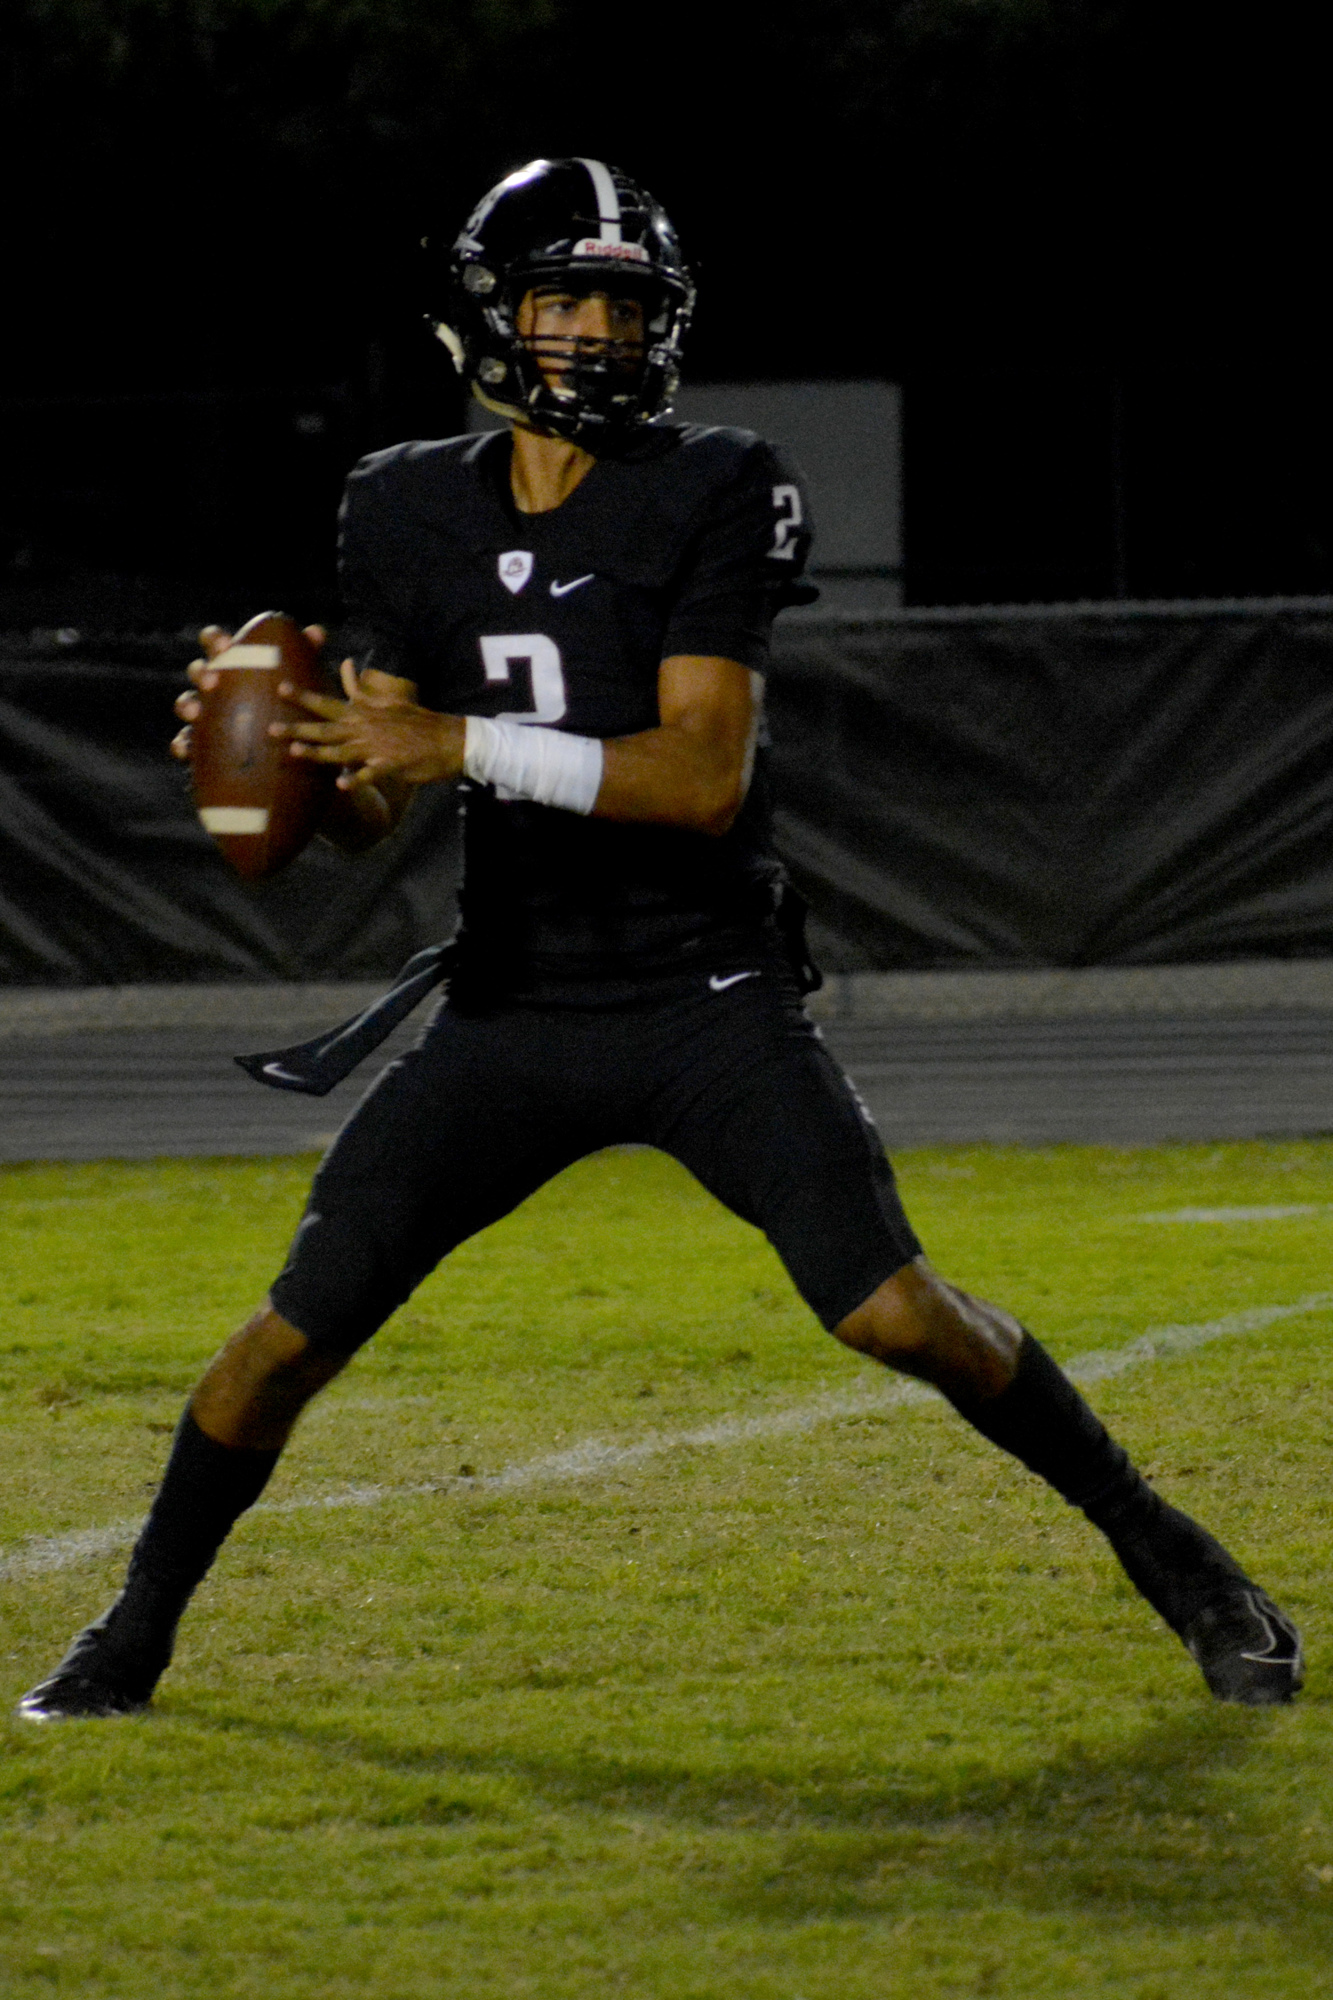 3. Shawqi Itraish set the Braden River High passing yards record in 2019.